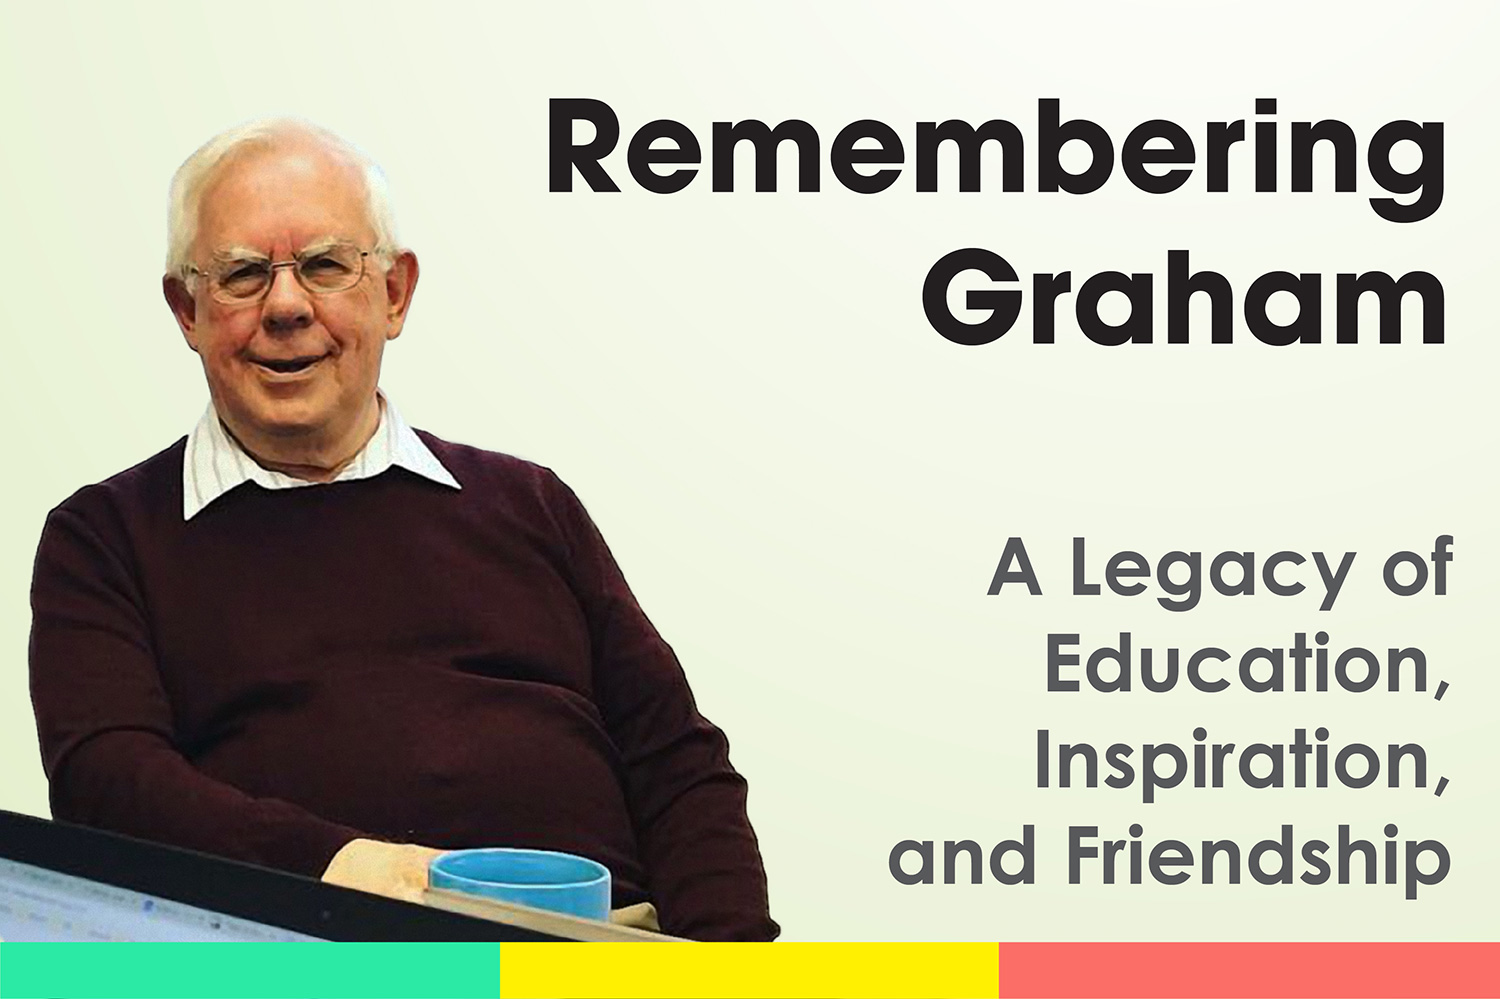 Remembering Graham: A Legacy of Education, Inspiration, and Friendship